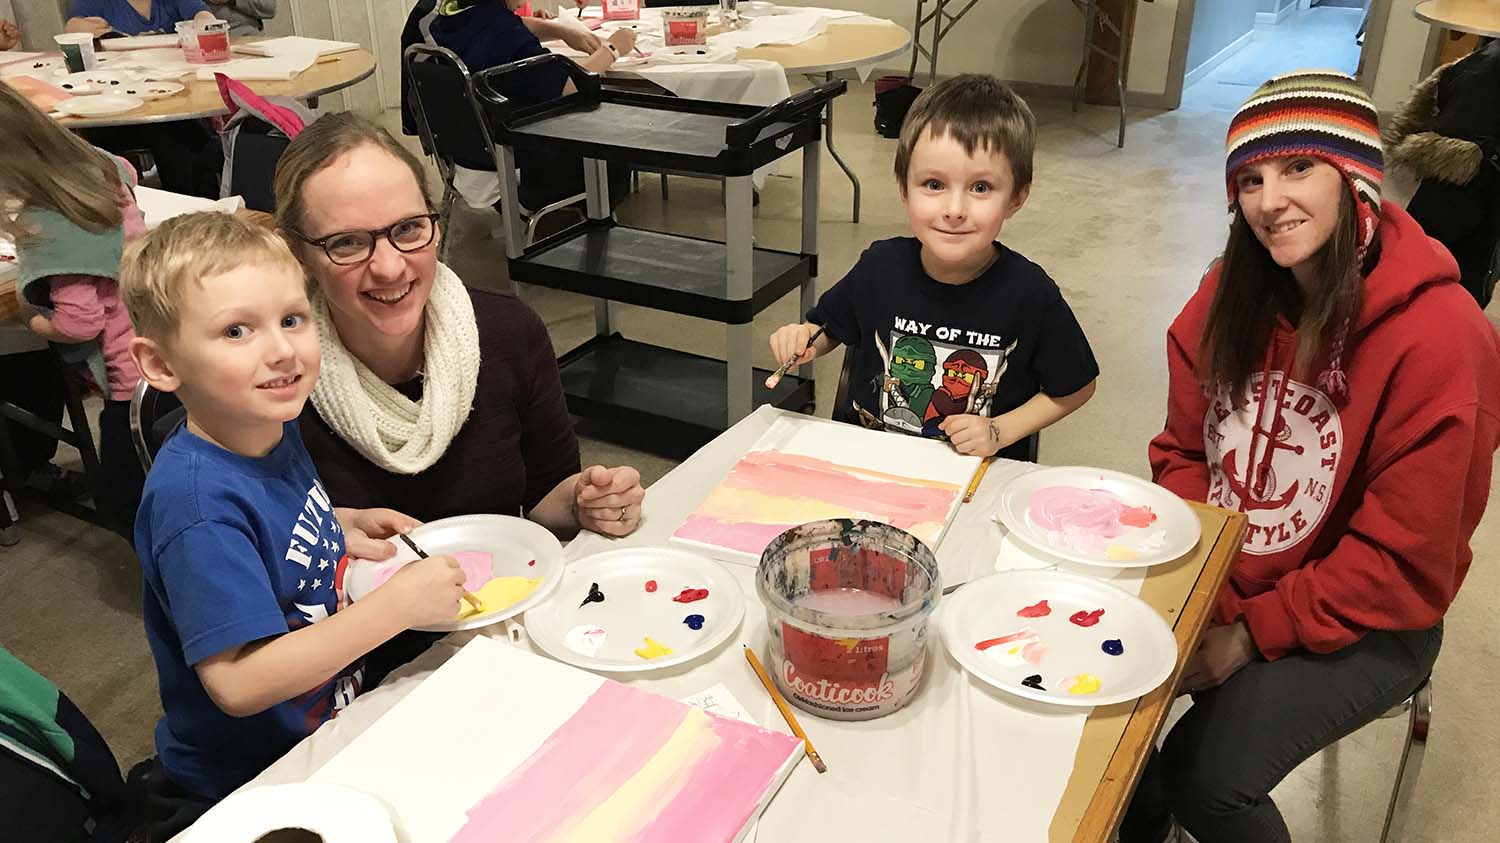 Galt family paint day draws a crowd